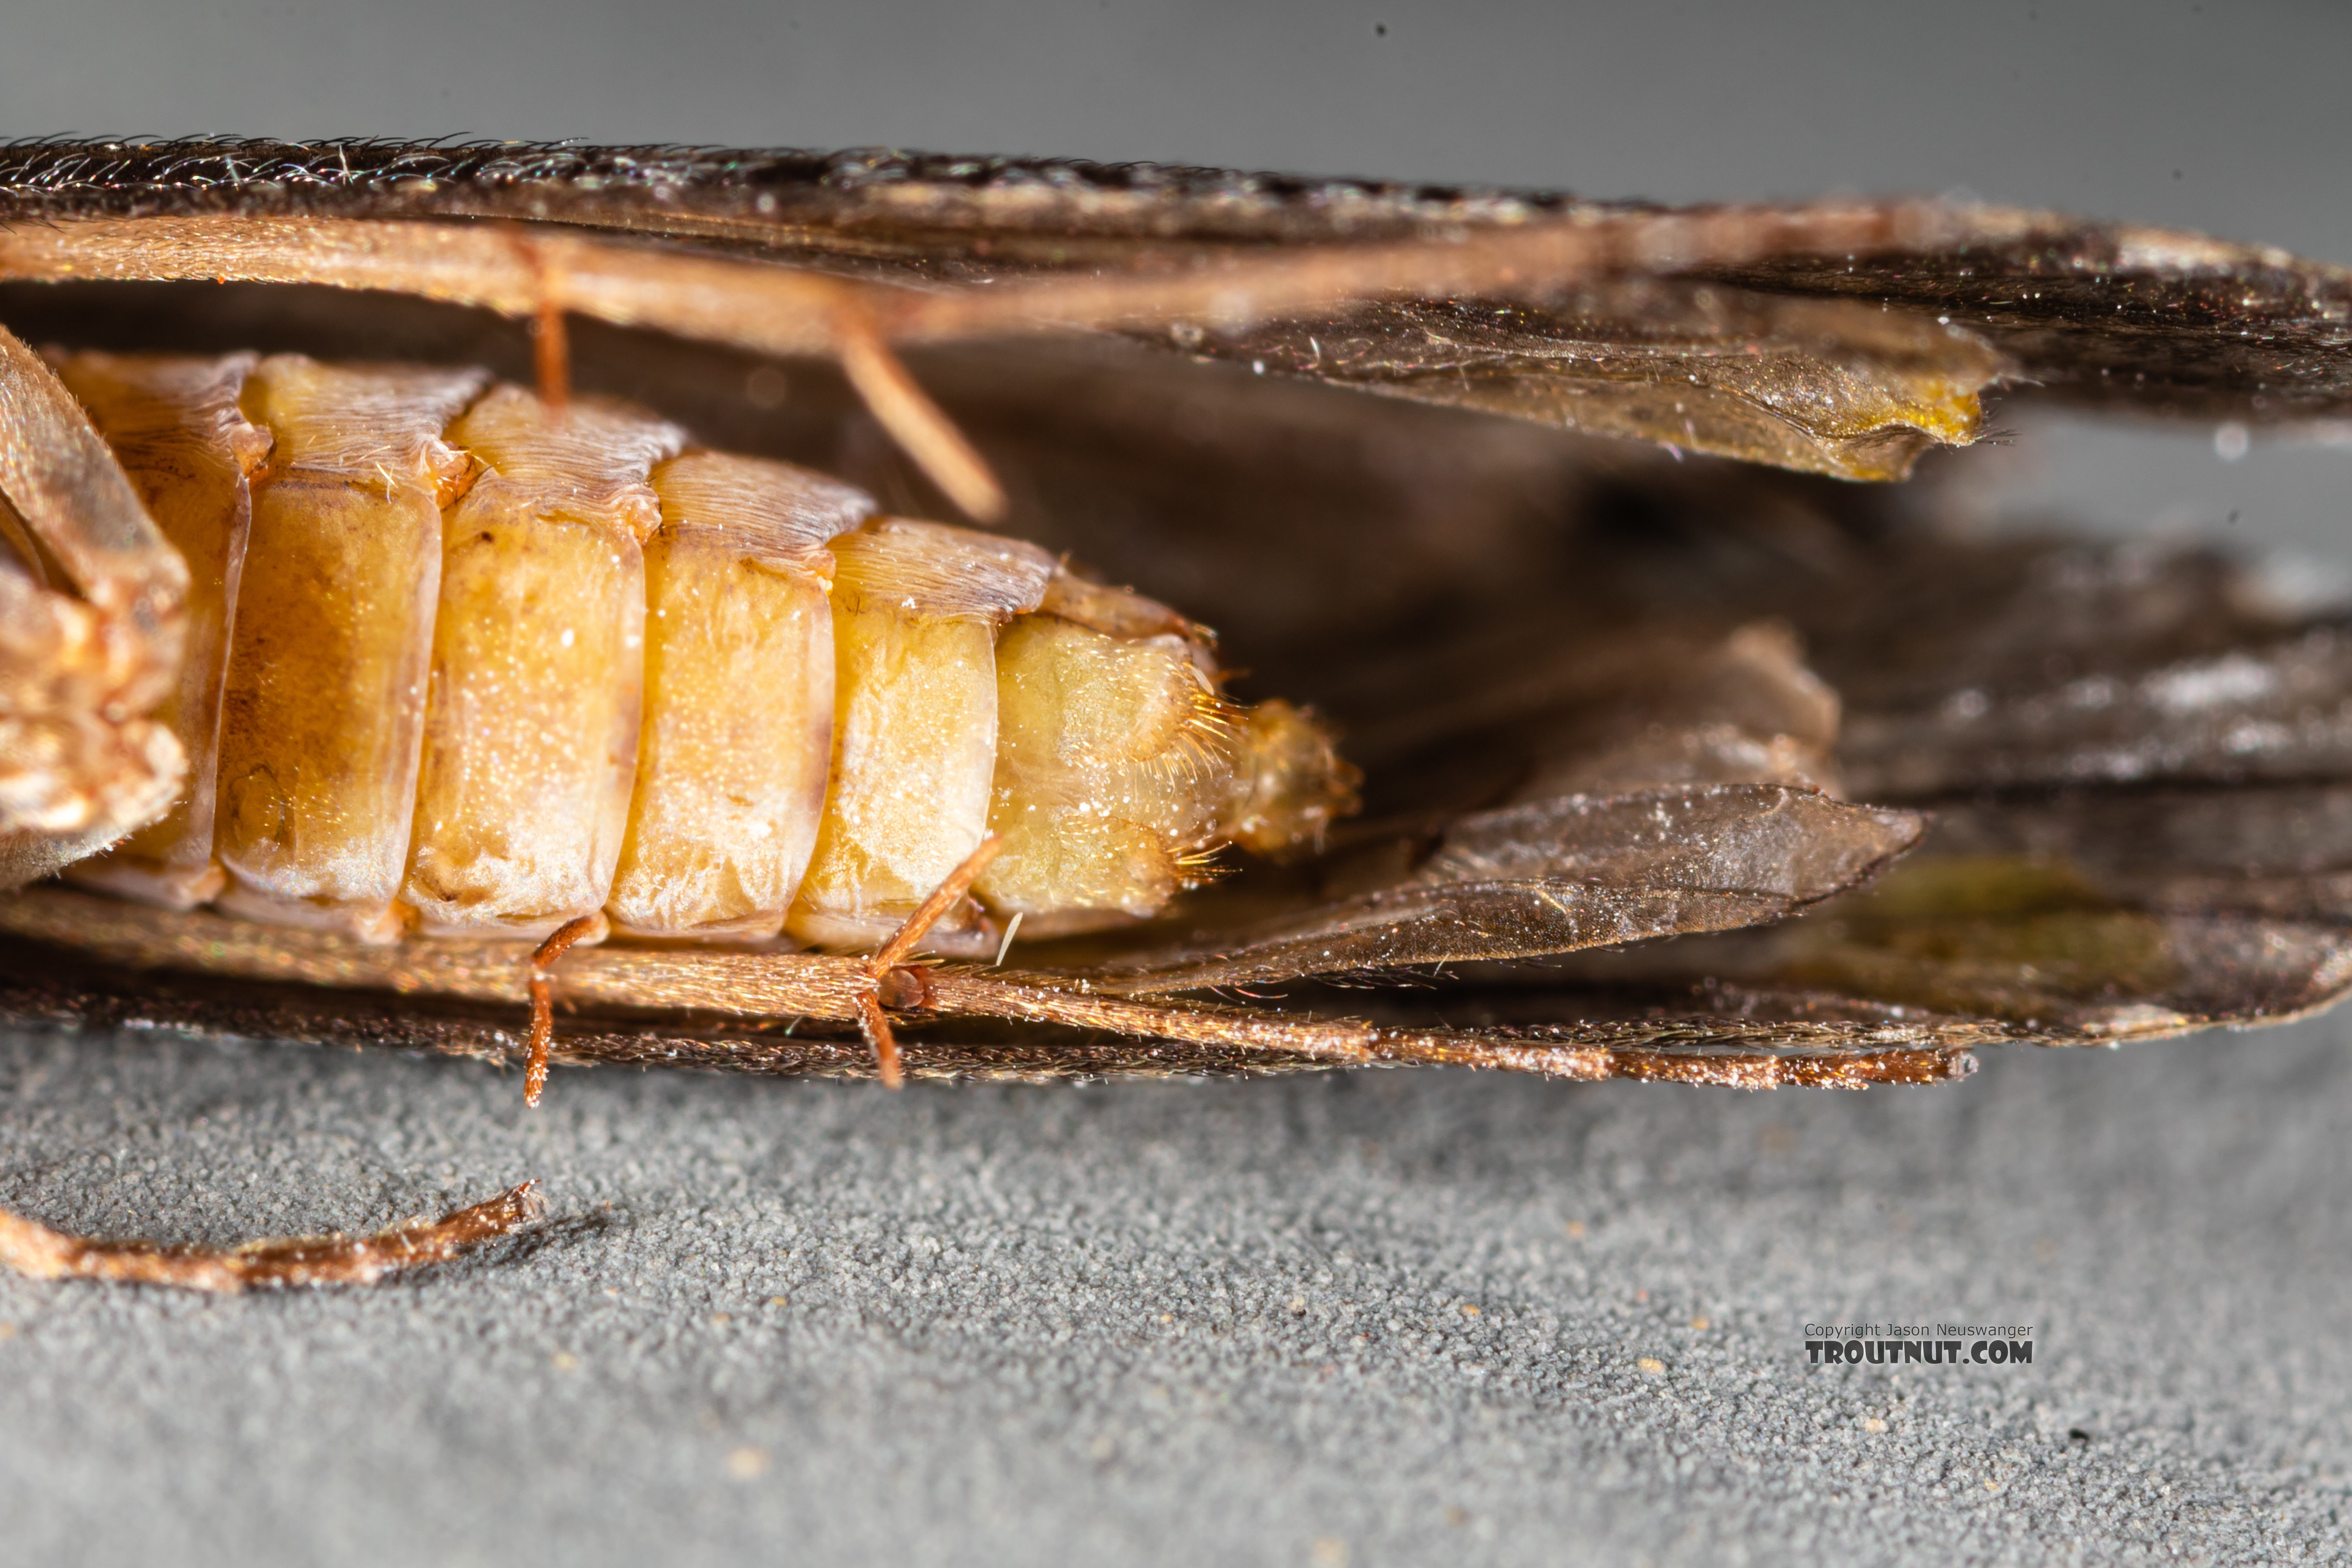 Hydropsyche (Spotted Sedges) Caddisfly Adult from the Madison River in Montana